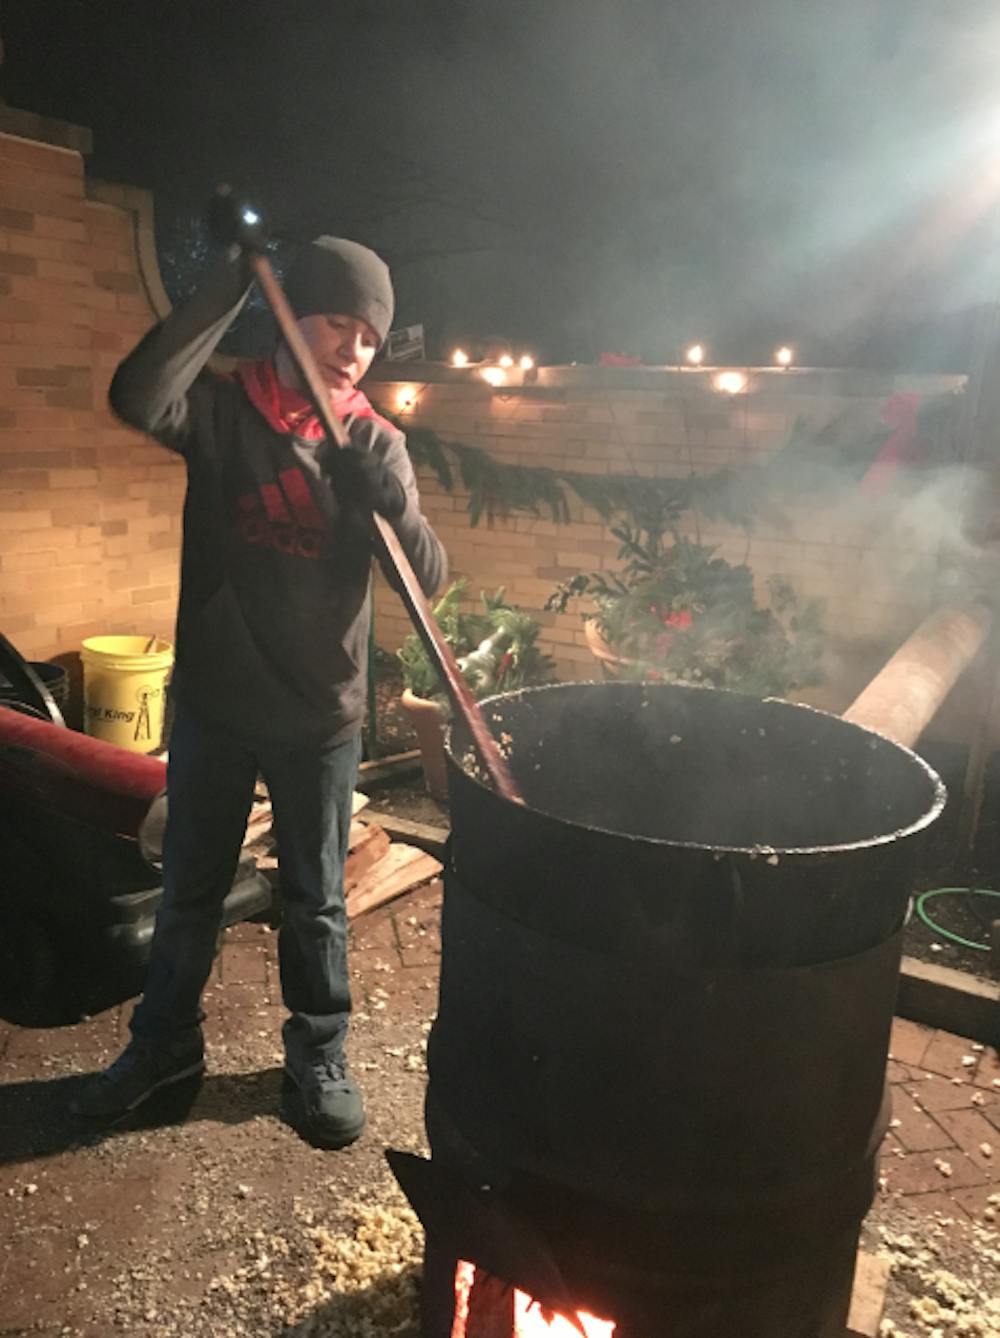 <p>Ashton Pauley, 12, stirs kettle corn in a big pot at the Minnetrista Enchanted Luminaria Walk on Dec. 4. Ashton was helping his great uncle and grandpa out at the event to raise money&nbsp;to buy children with disabilities tricycles. <em>DN PHOTO MICHELLE KAUFMAN</em></p>